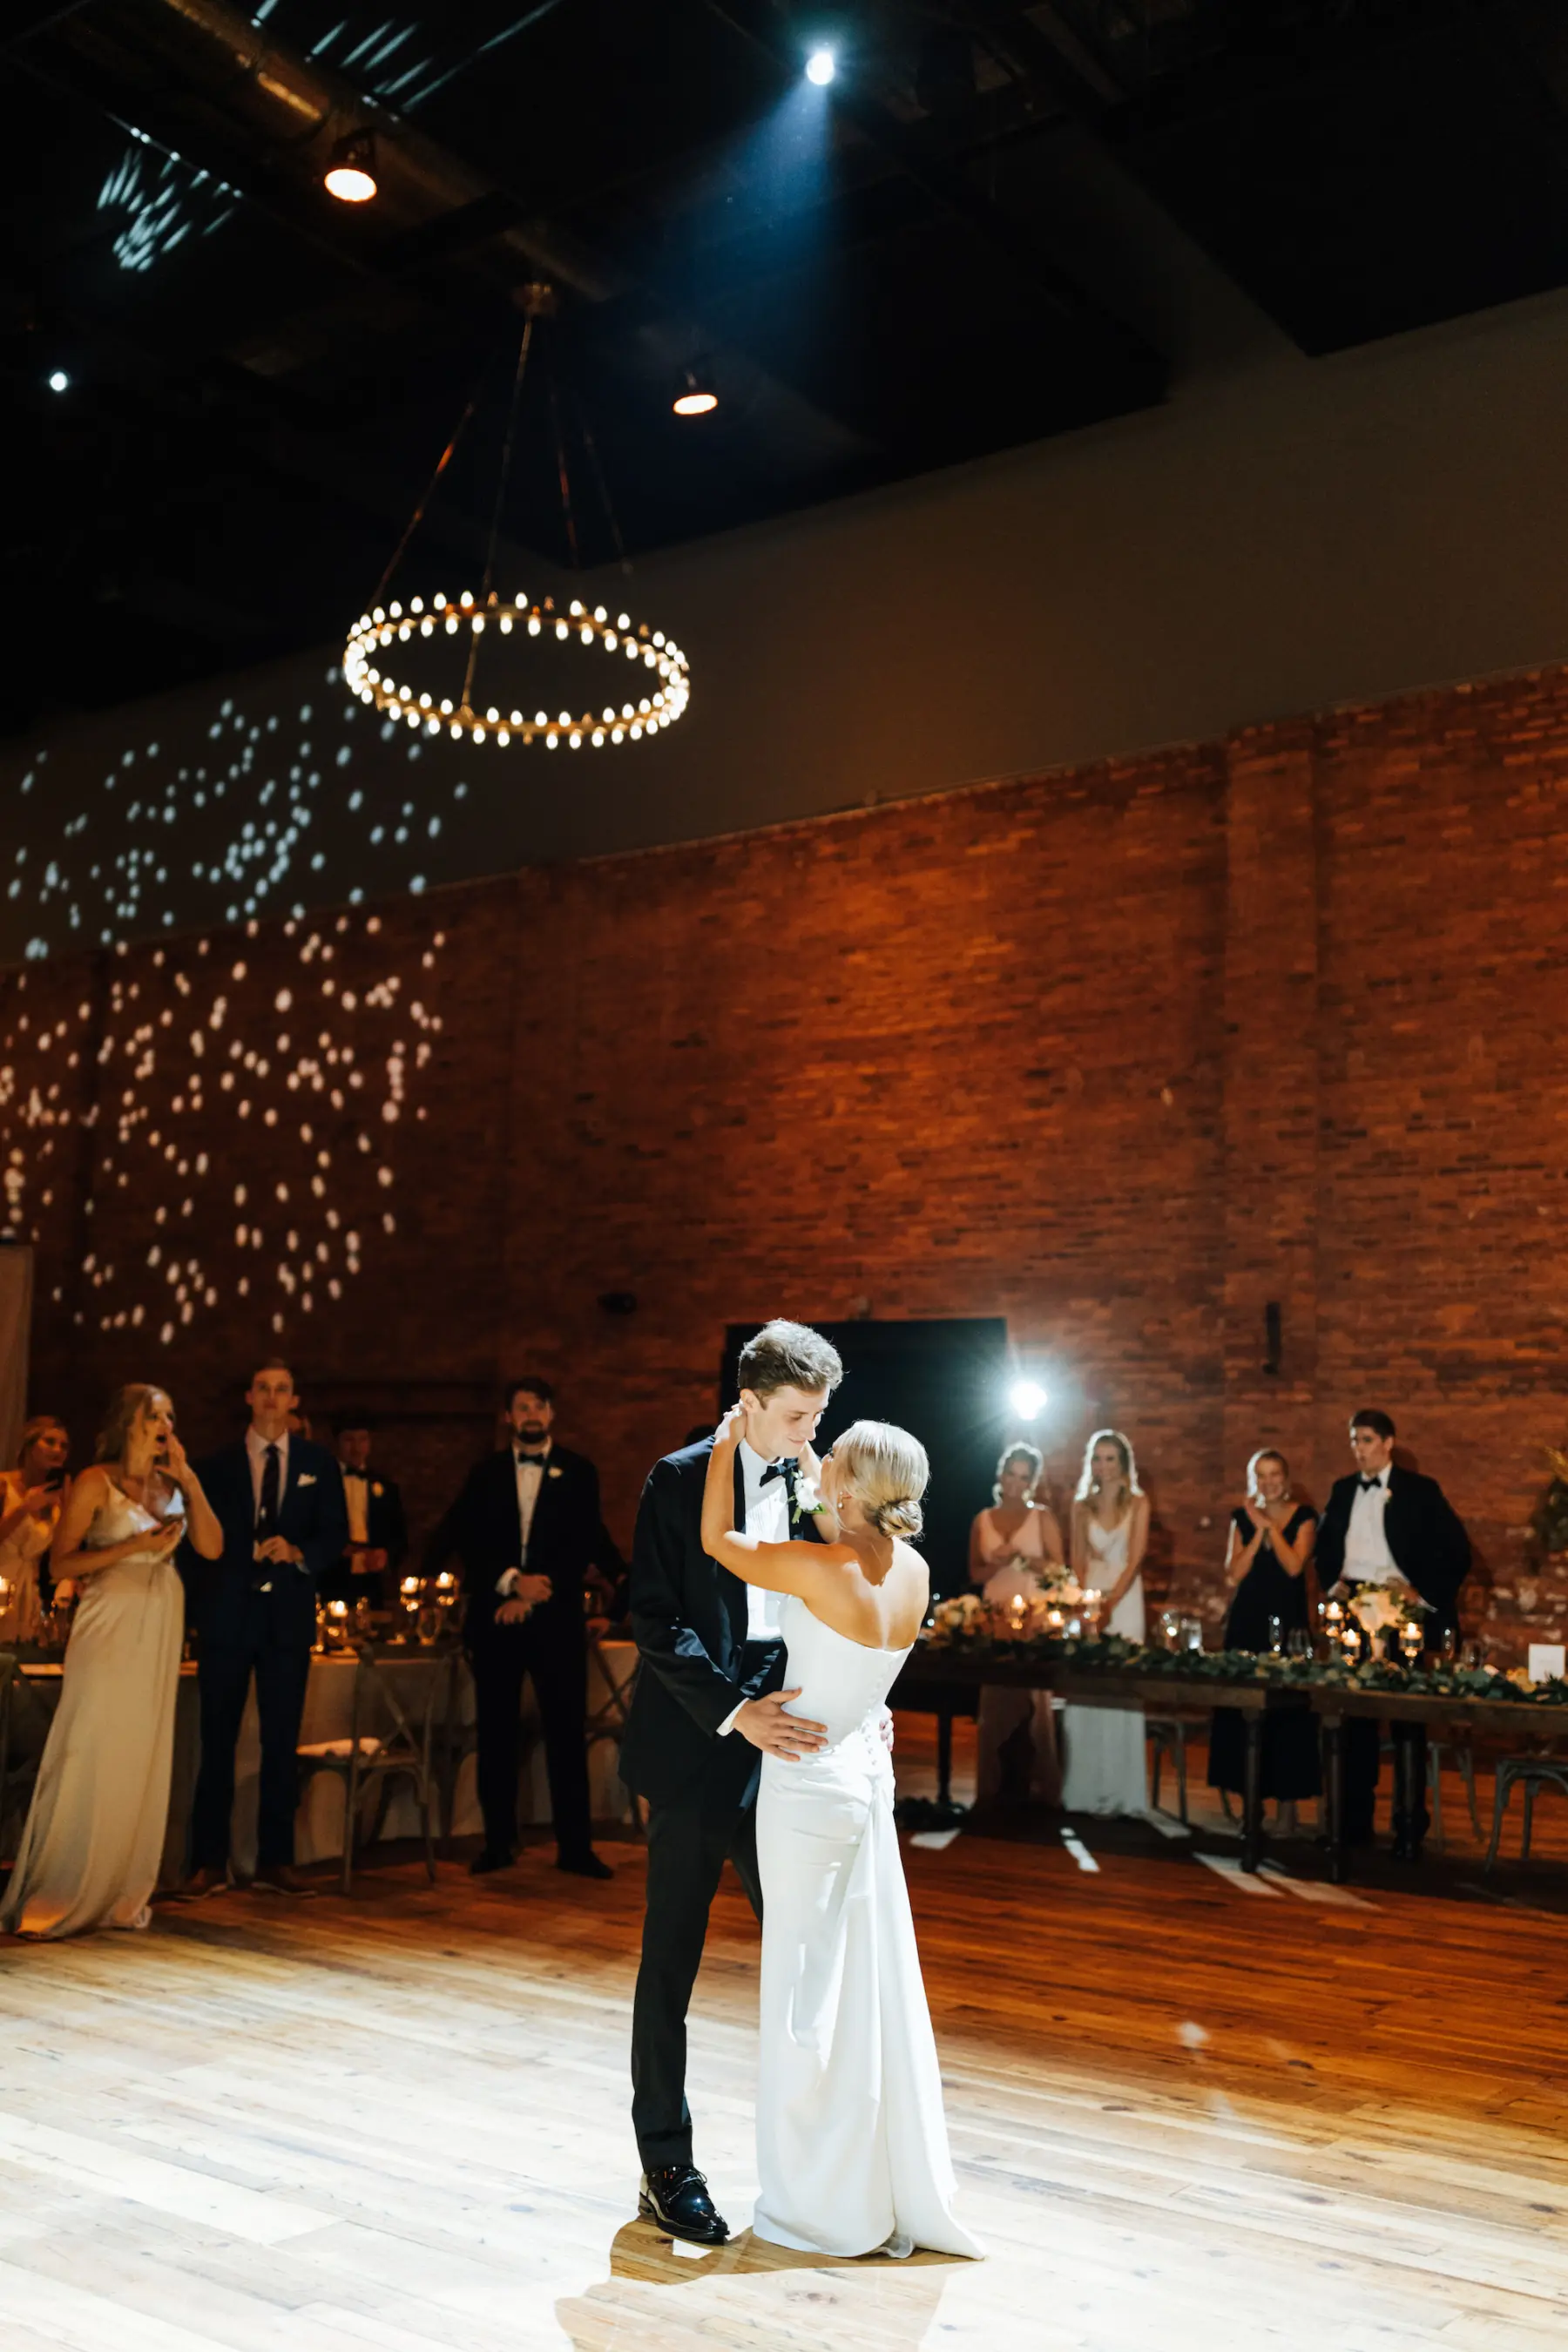 Bride and Groom First Dance Wedding Portrait | Tampa Photographer Amber McWhorter Photography | Planner B Eventful | Venue Armature Worka